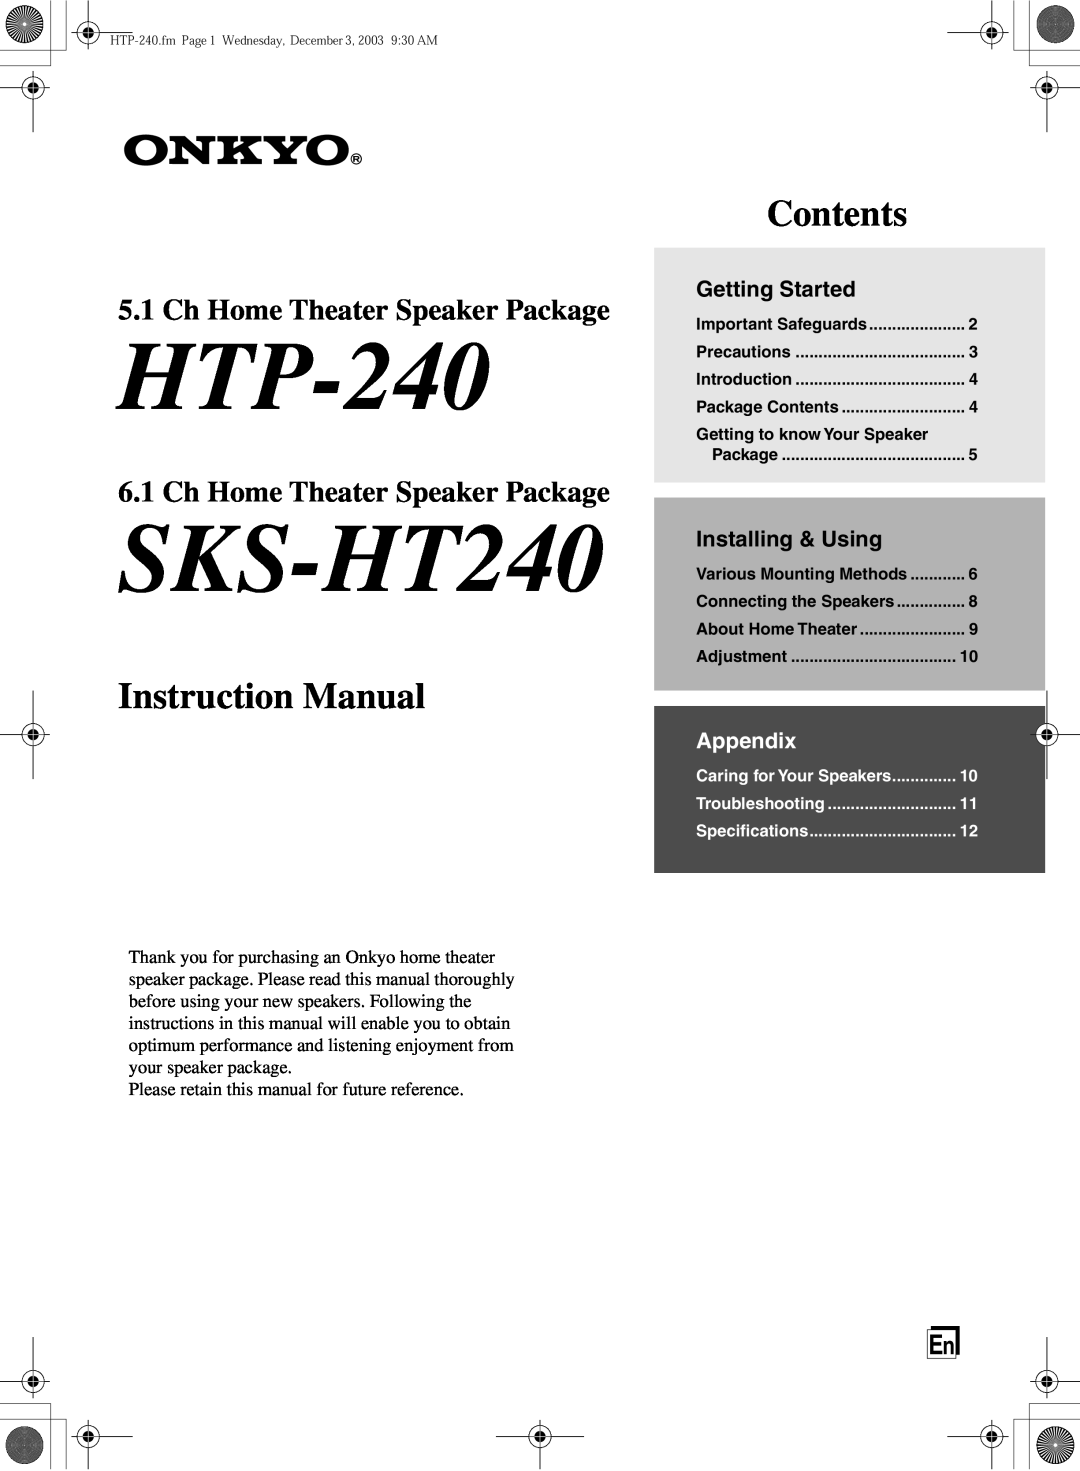 Onkyo HTP-240 instruction manual Getting Started, Installing & Using, SKS-HT240, Contents, Ch Home Theater Speaker Package 